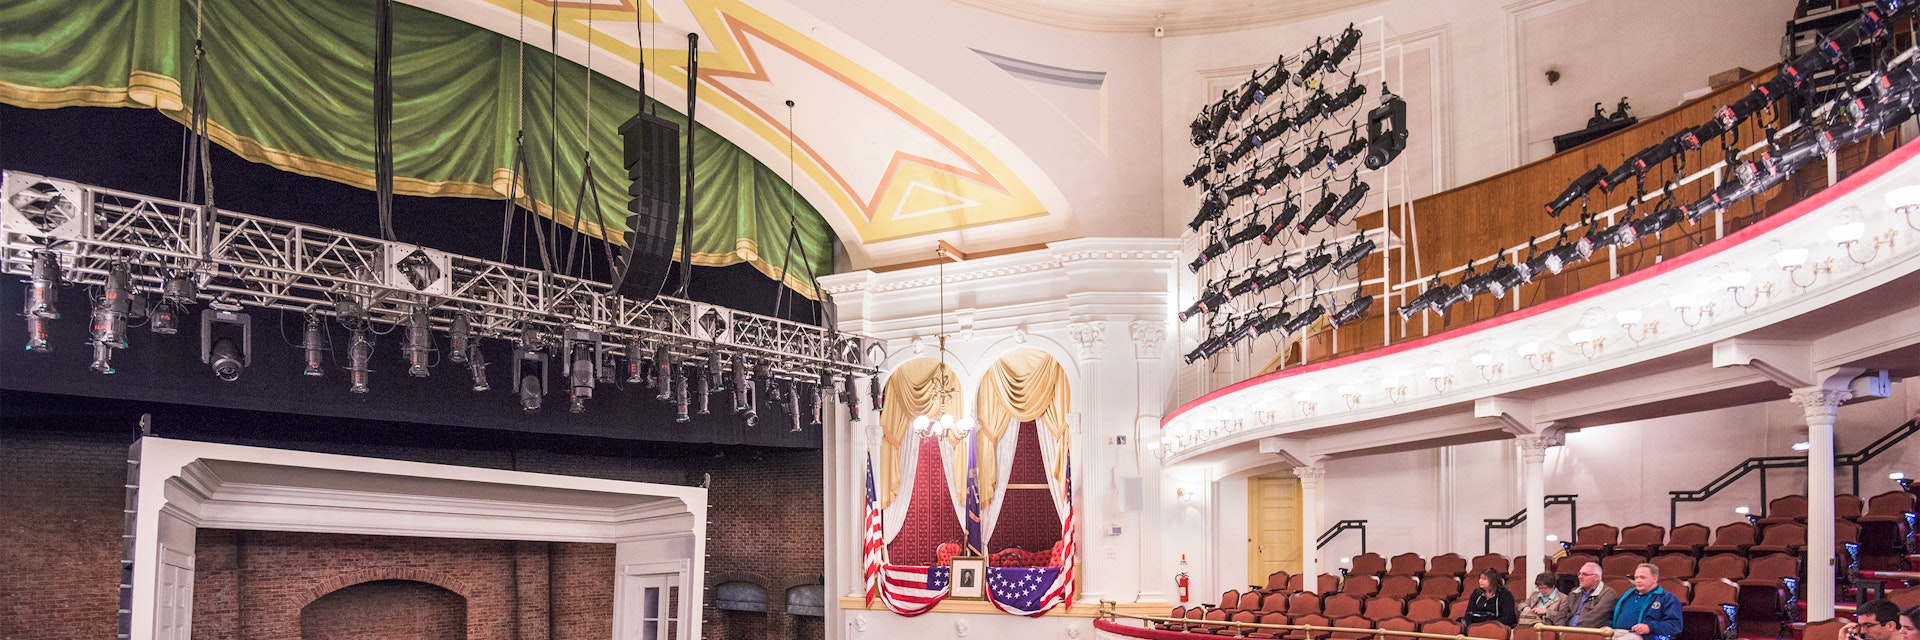 WASHINGTON - APRIL 12, 2015: Stage and seating of Ford's Theatre. The theater is infamous as the site of President Abraham Lincoln's assassination by John Wilkes Booth in 1865.
405822280
chairs, america, historical, abraham, state, national, theater, view, ford, seats, president, landmark, dc, location, s, washington, united, balcony, box, historic, district, stage, place, rows, interior, seating, lincoln, columbia, site, museum, american, d.c., assasination, theatre, john, booth, wilkes